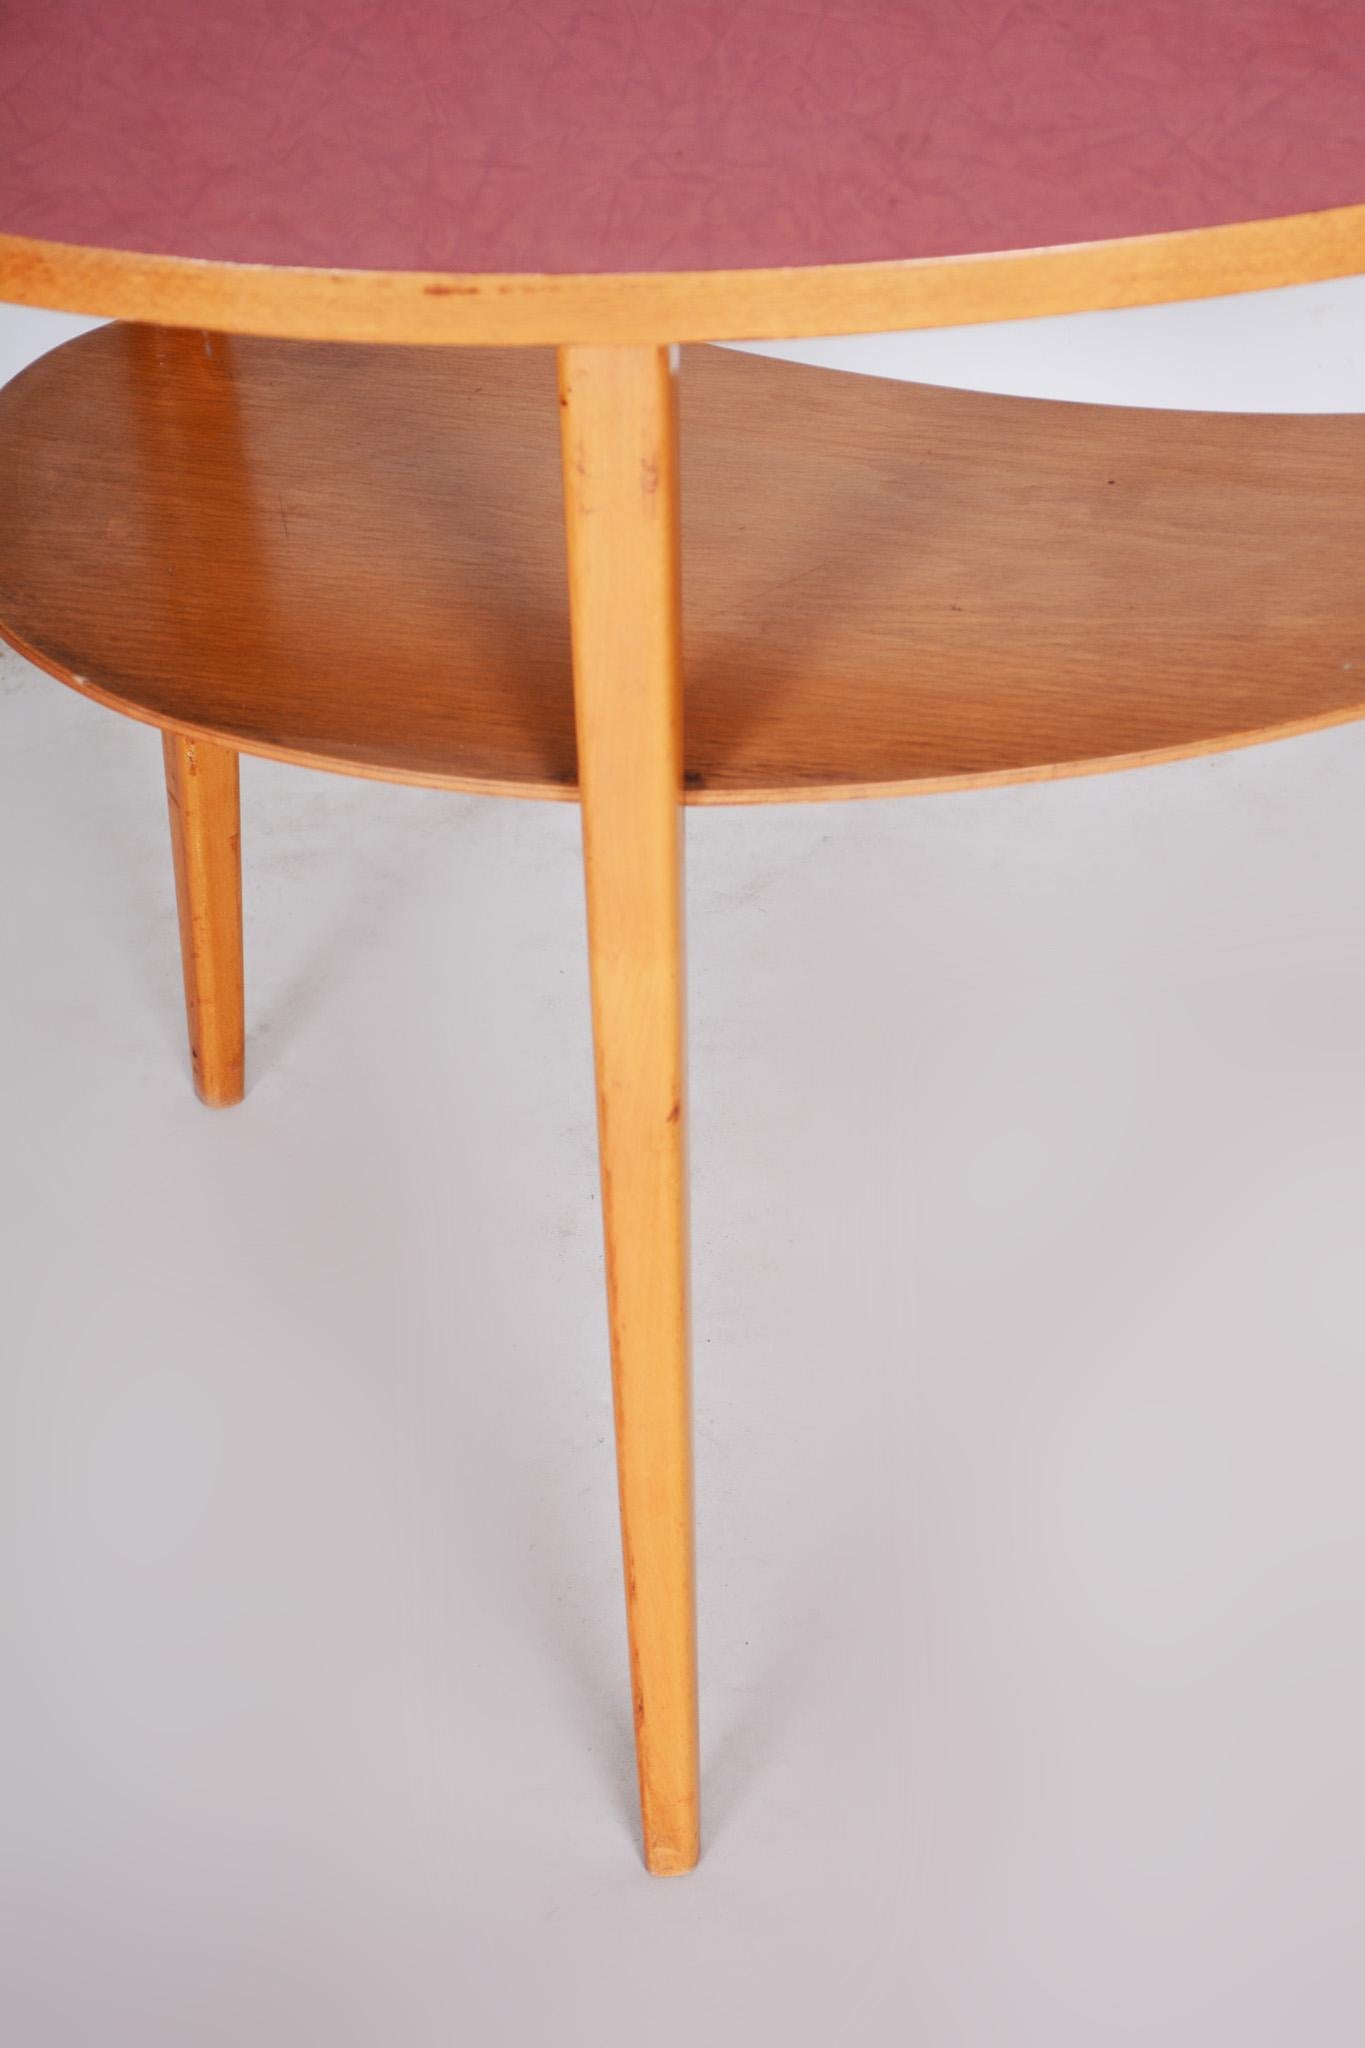 Formica Small Beech Table, Czech Midcentury, Preserved in Original Condition, 1950s For Sale